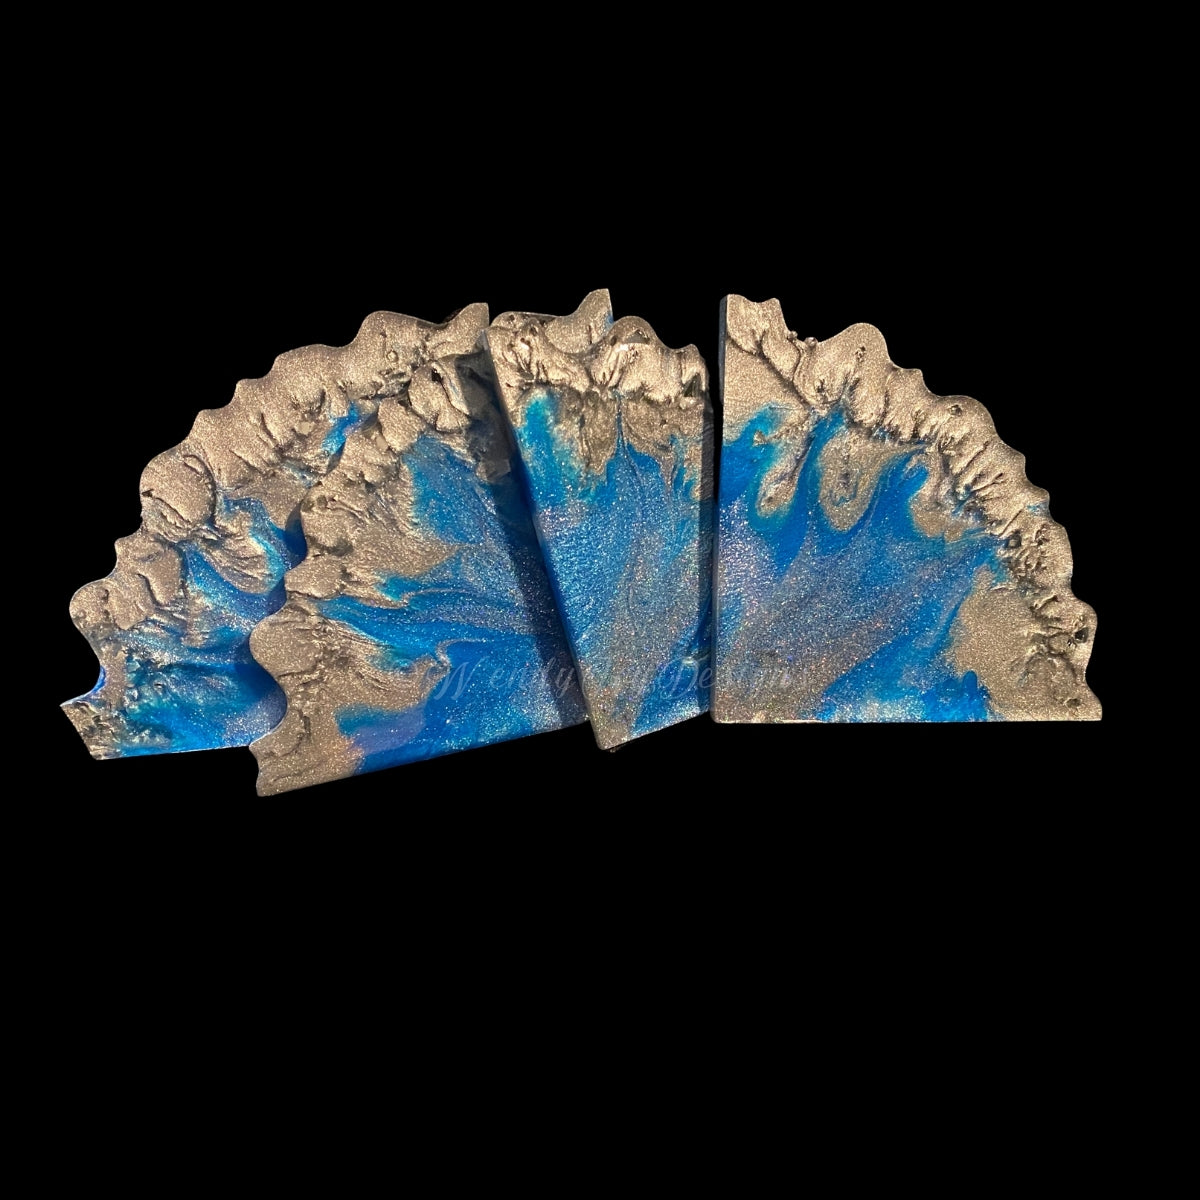 Silver and Blue Agate Coasters